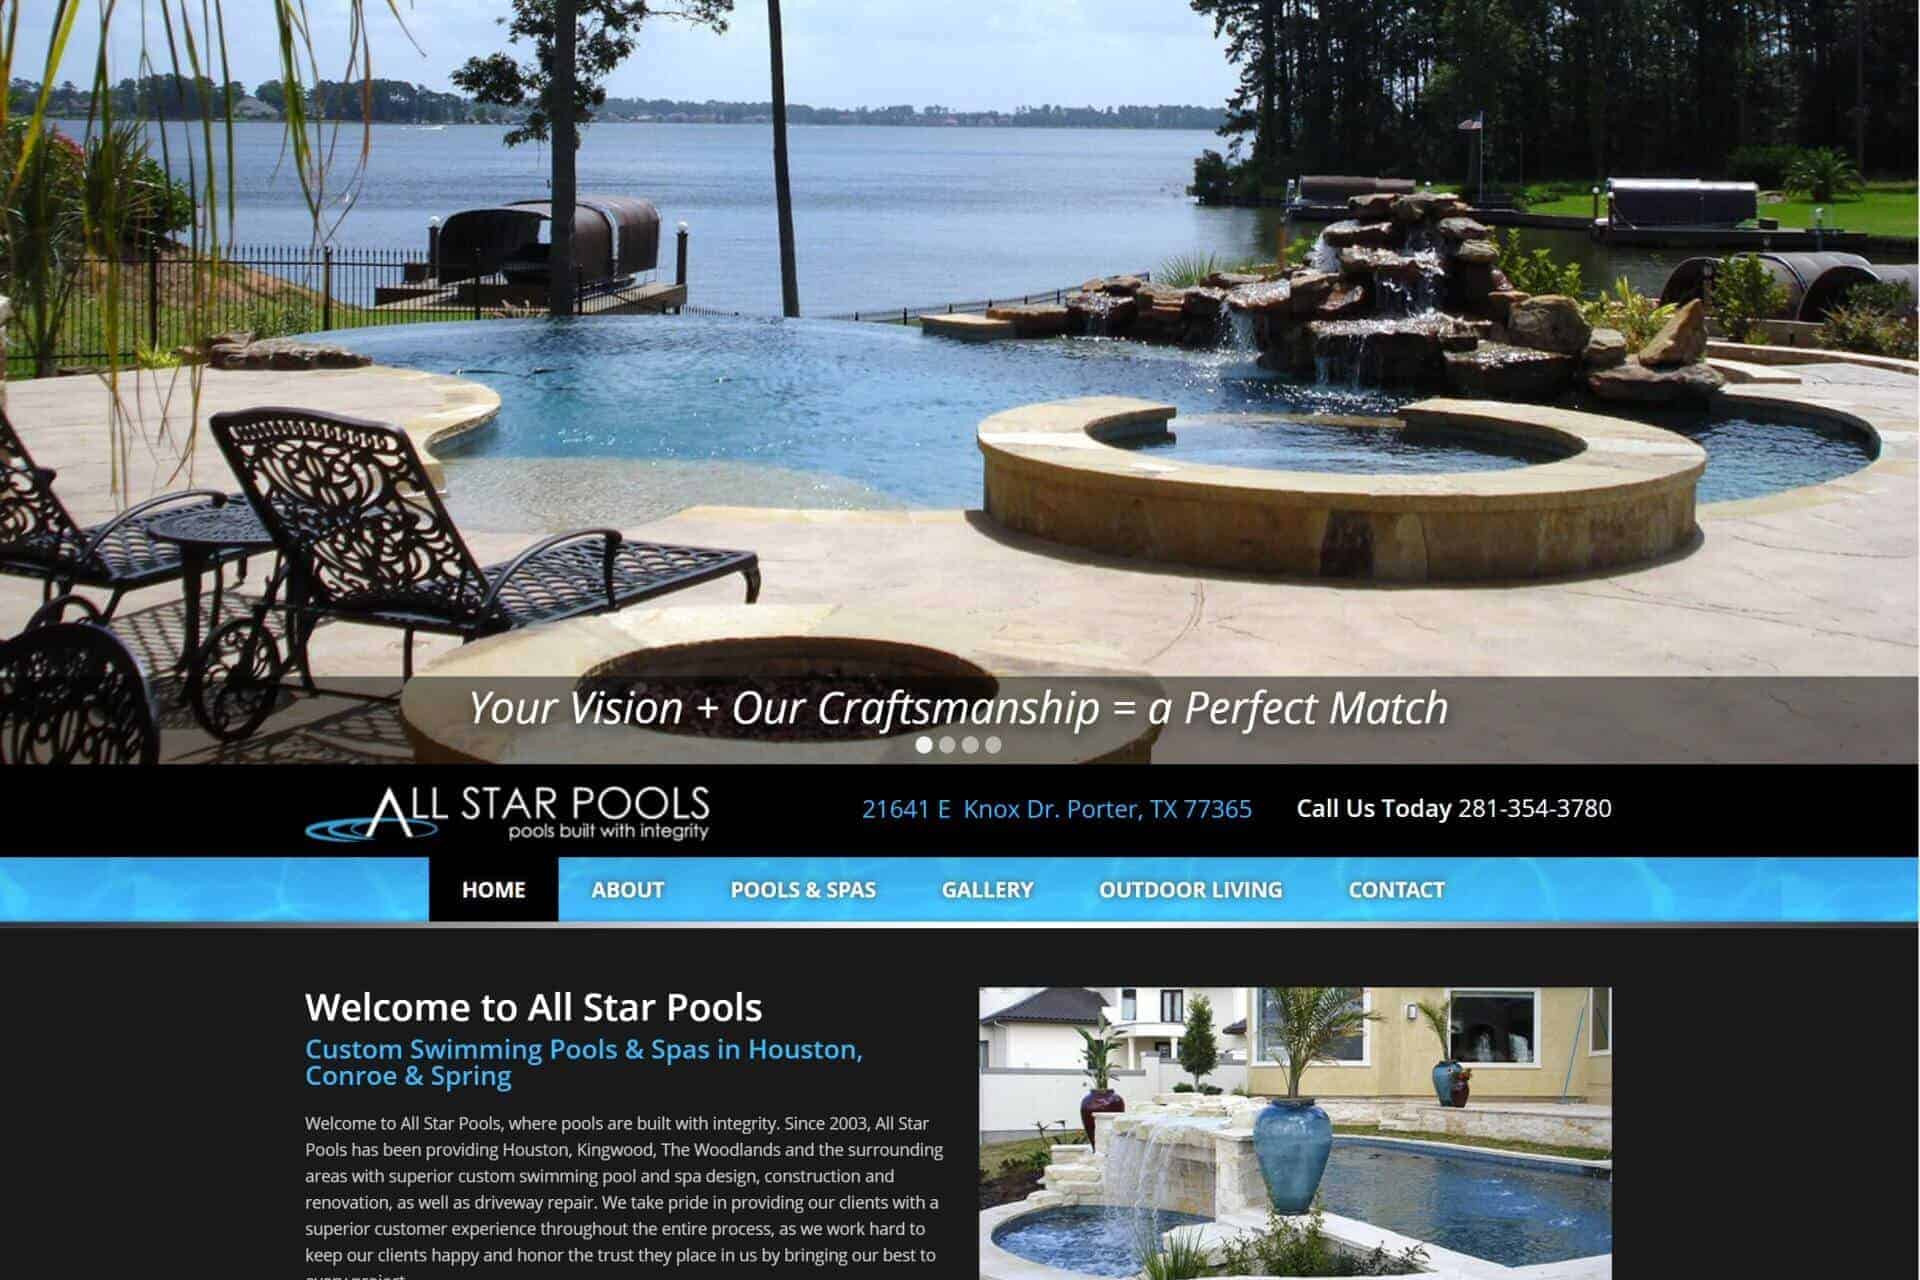 All Star Pools by Getan Resources Engineering Services